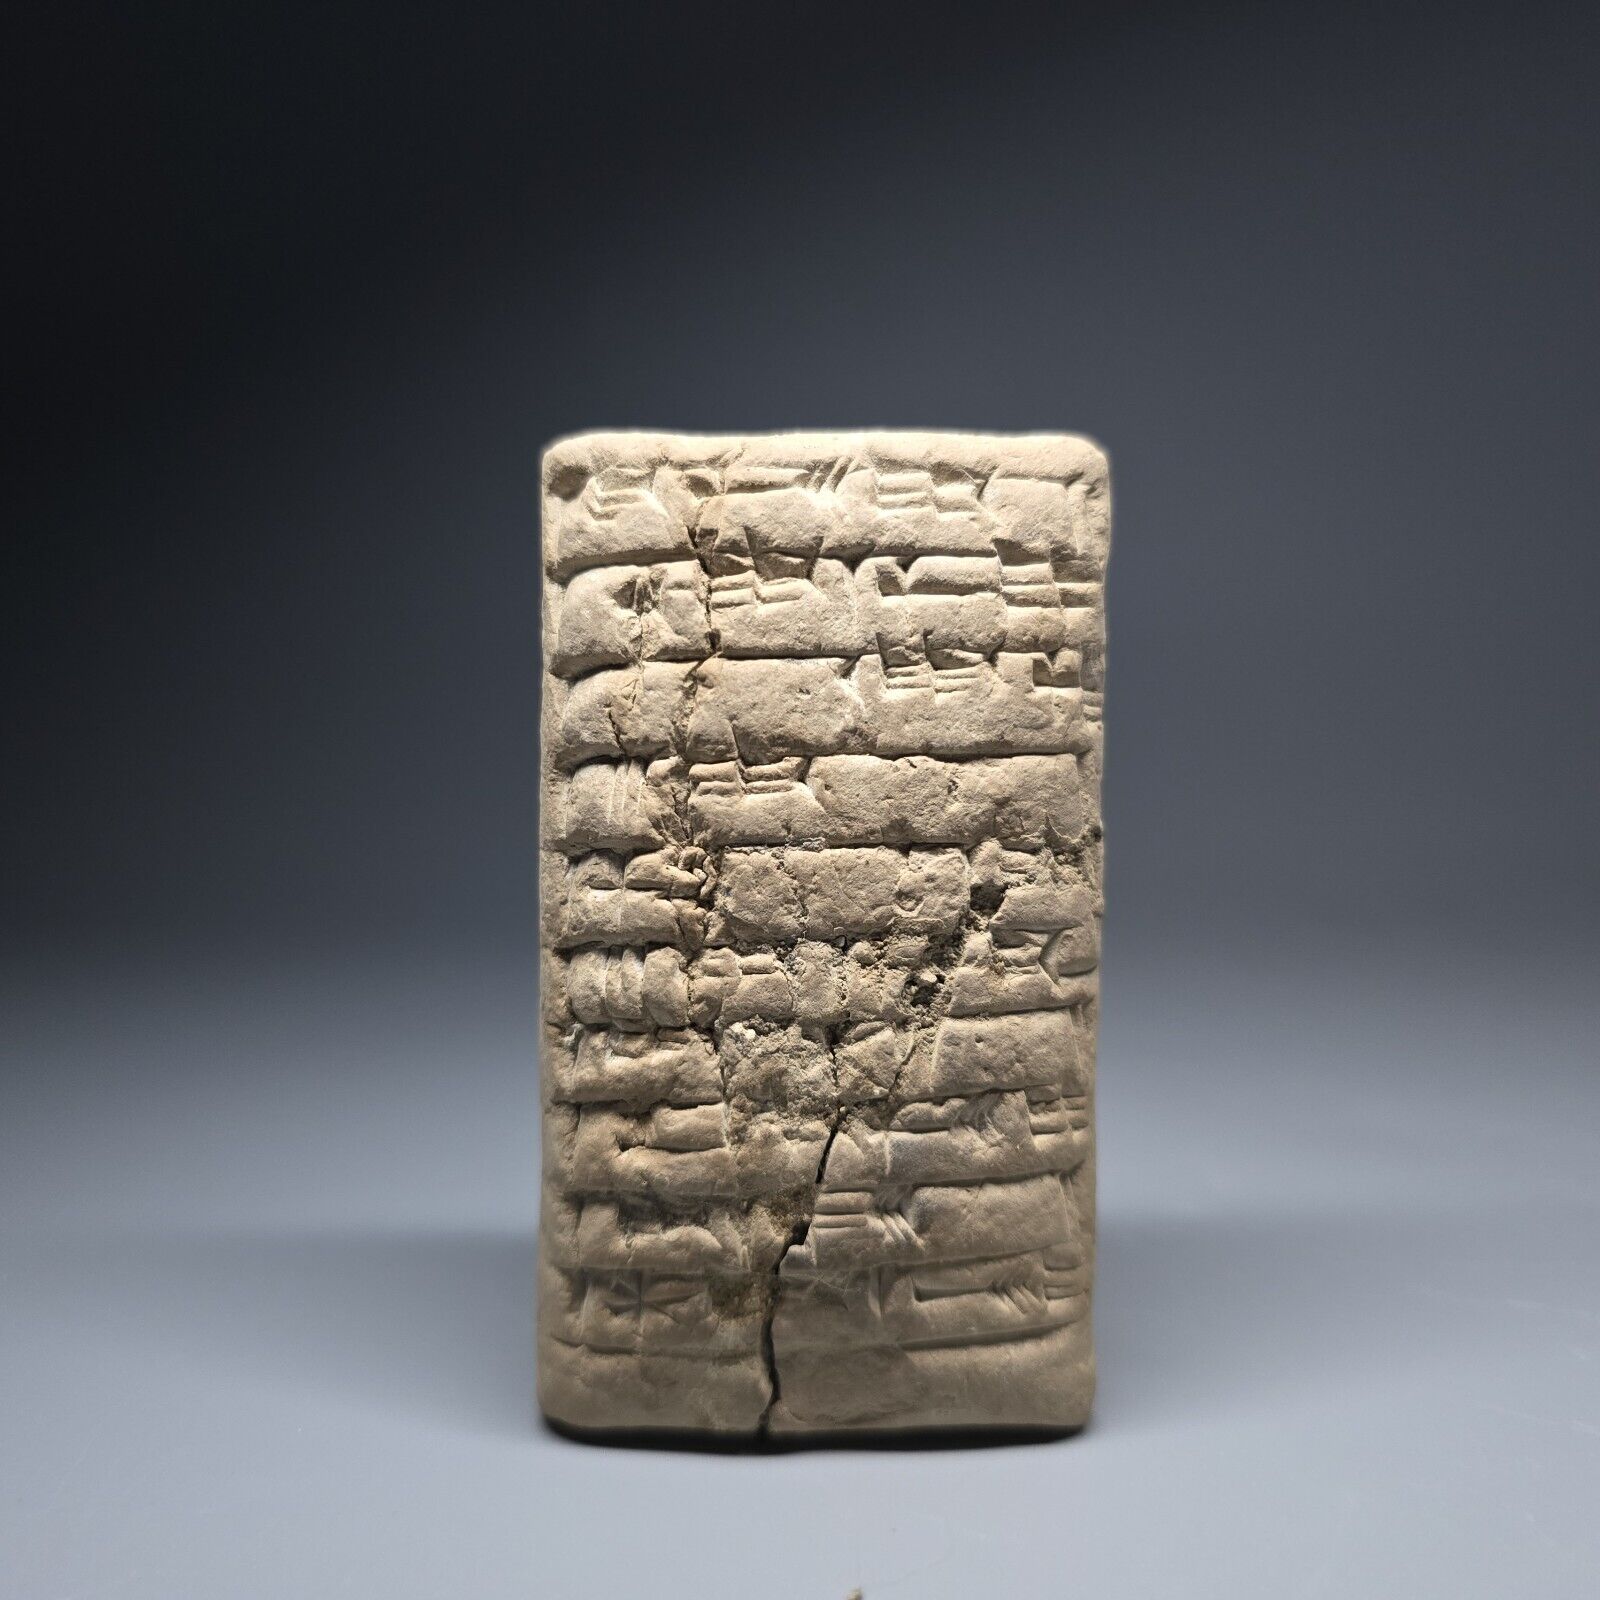 CIRCA AN  BABYLONIAN CUNEIFORM CLAY TERRACOTTA TABLET WITH EARLY FORM OF WRITING